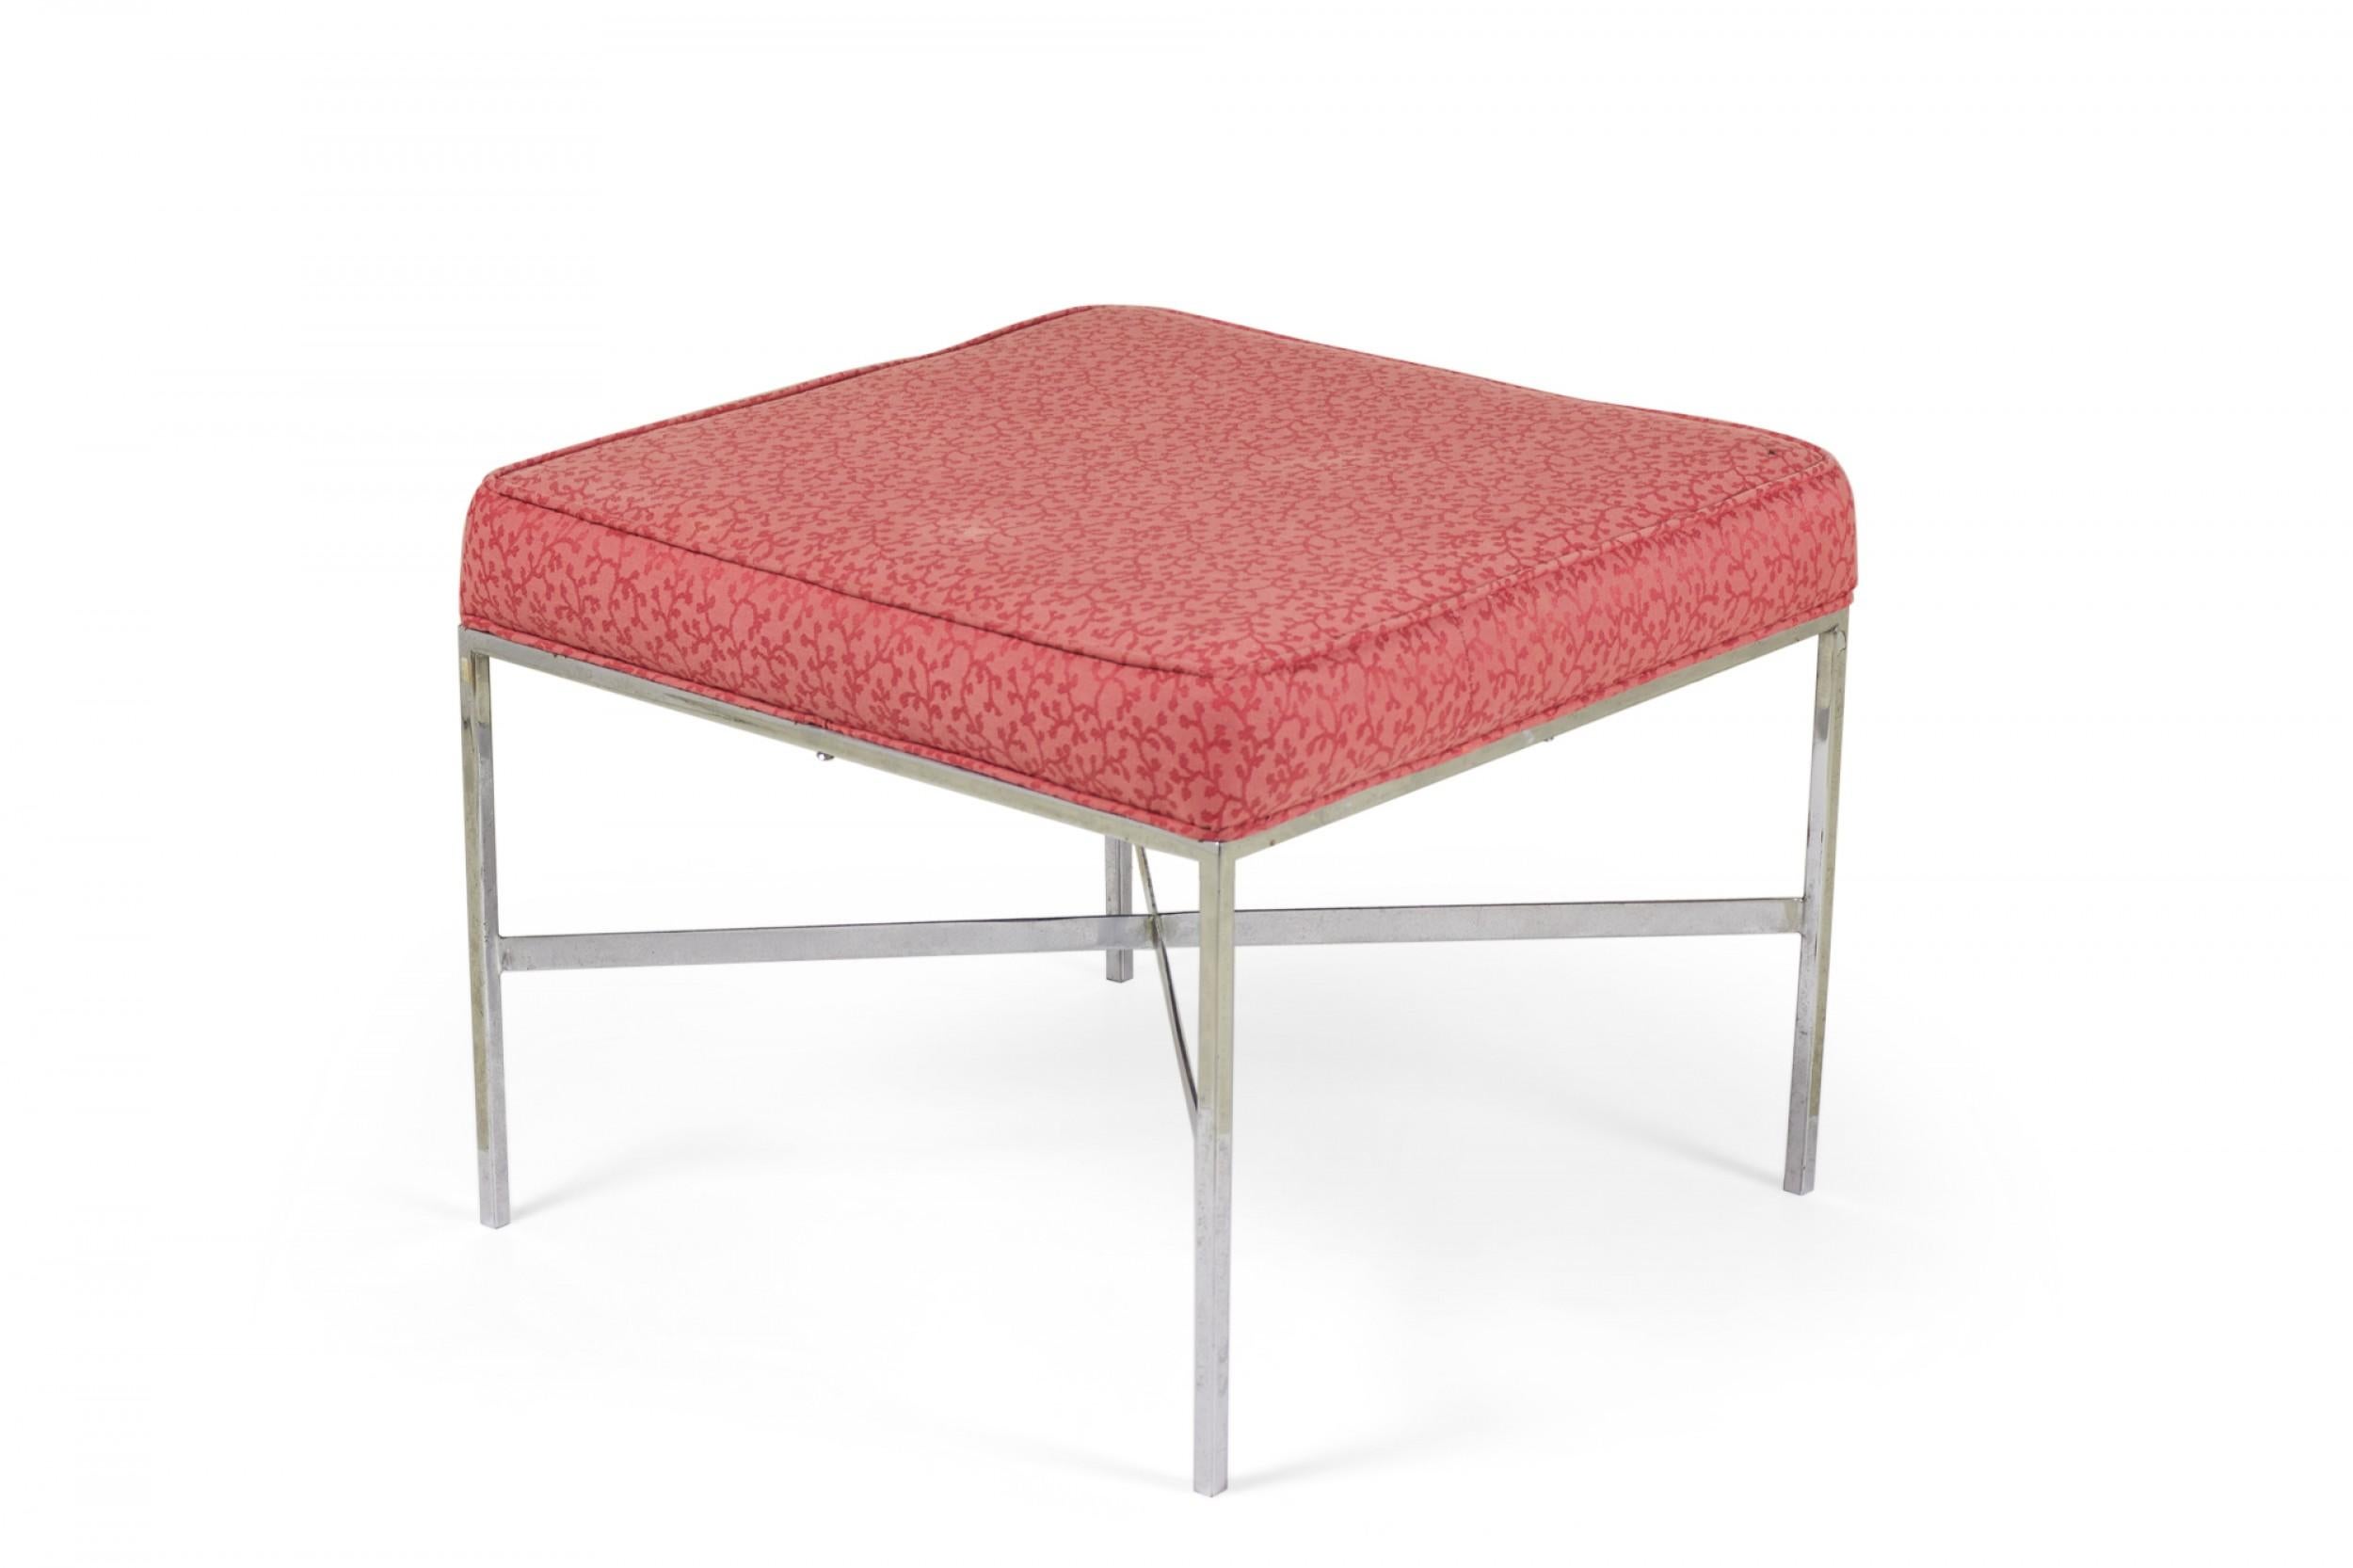 American Design Institute of Chrome and Raspberry Upholstery Square Bench For Sale